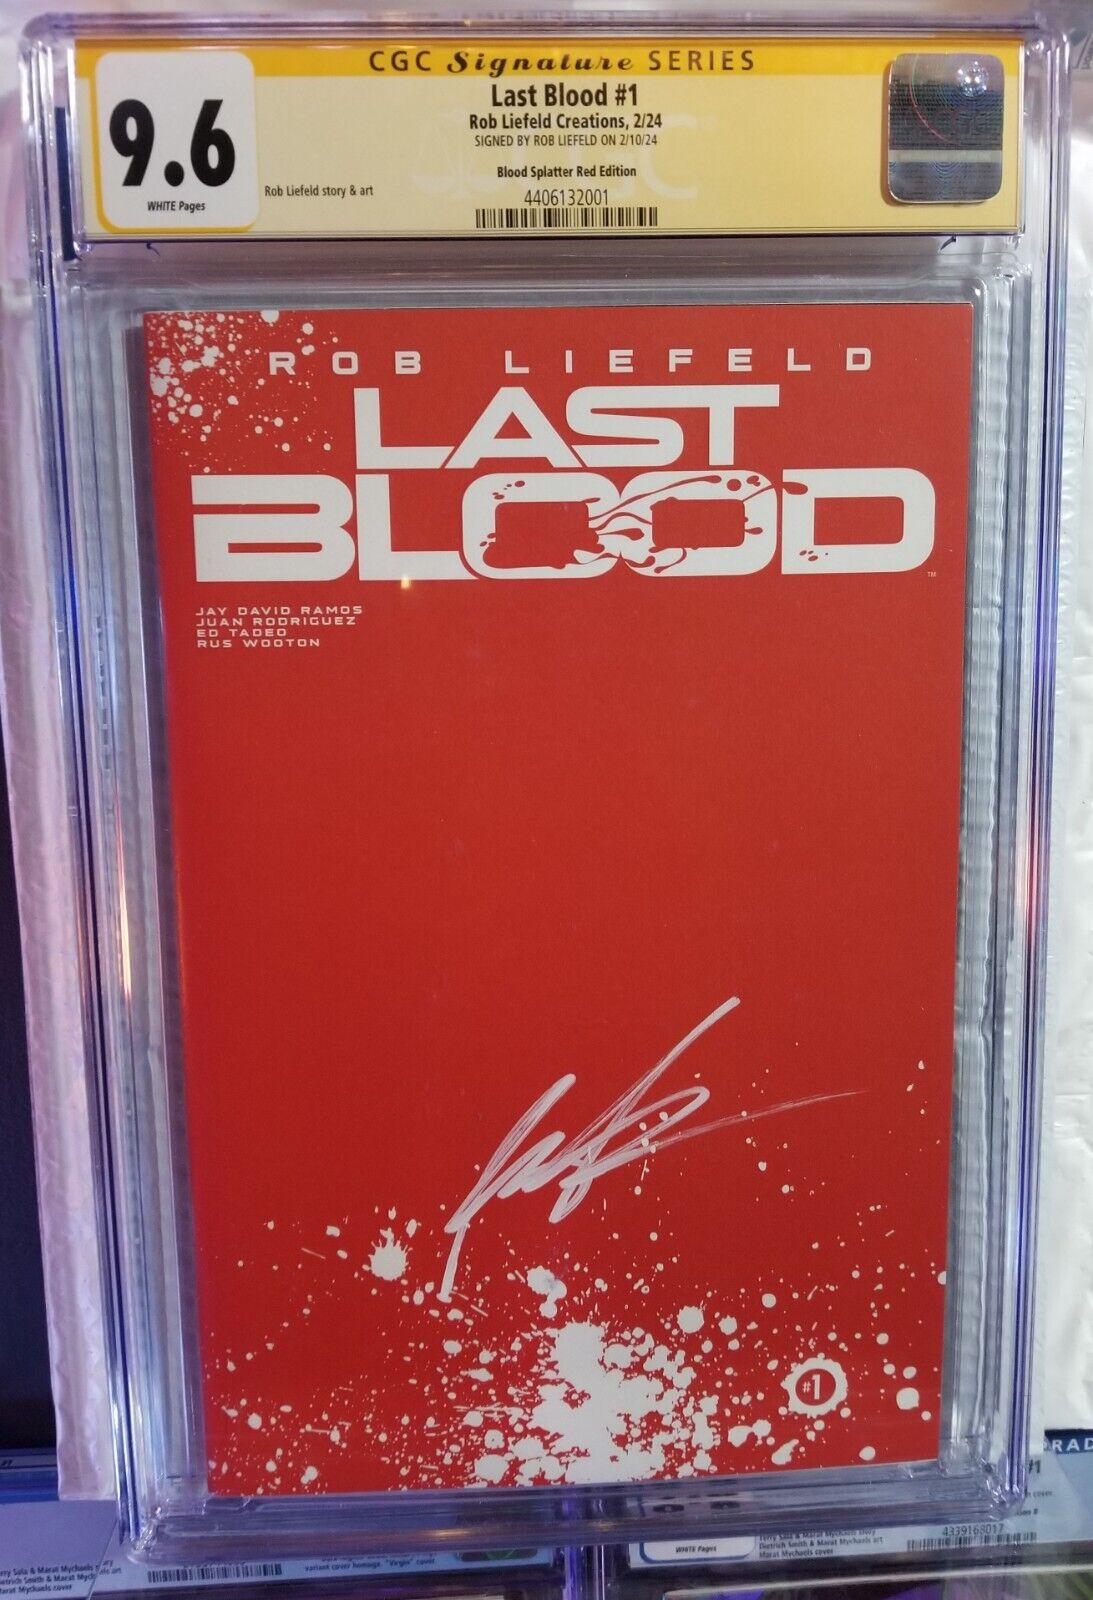 LAST BLOOD #1 - CGC 9.6 SS - Signed  Rob Liefeld - Blood Splatter Red Edition